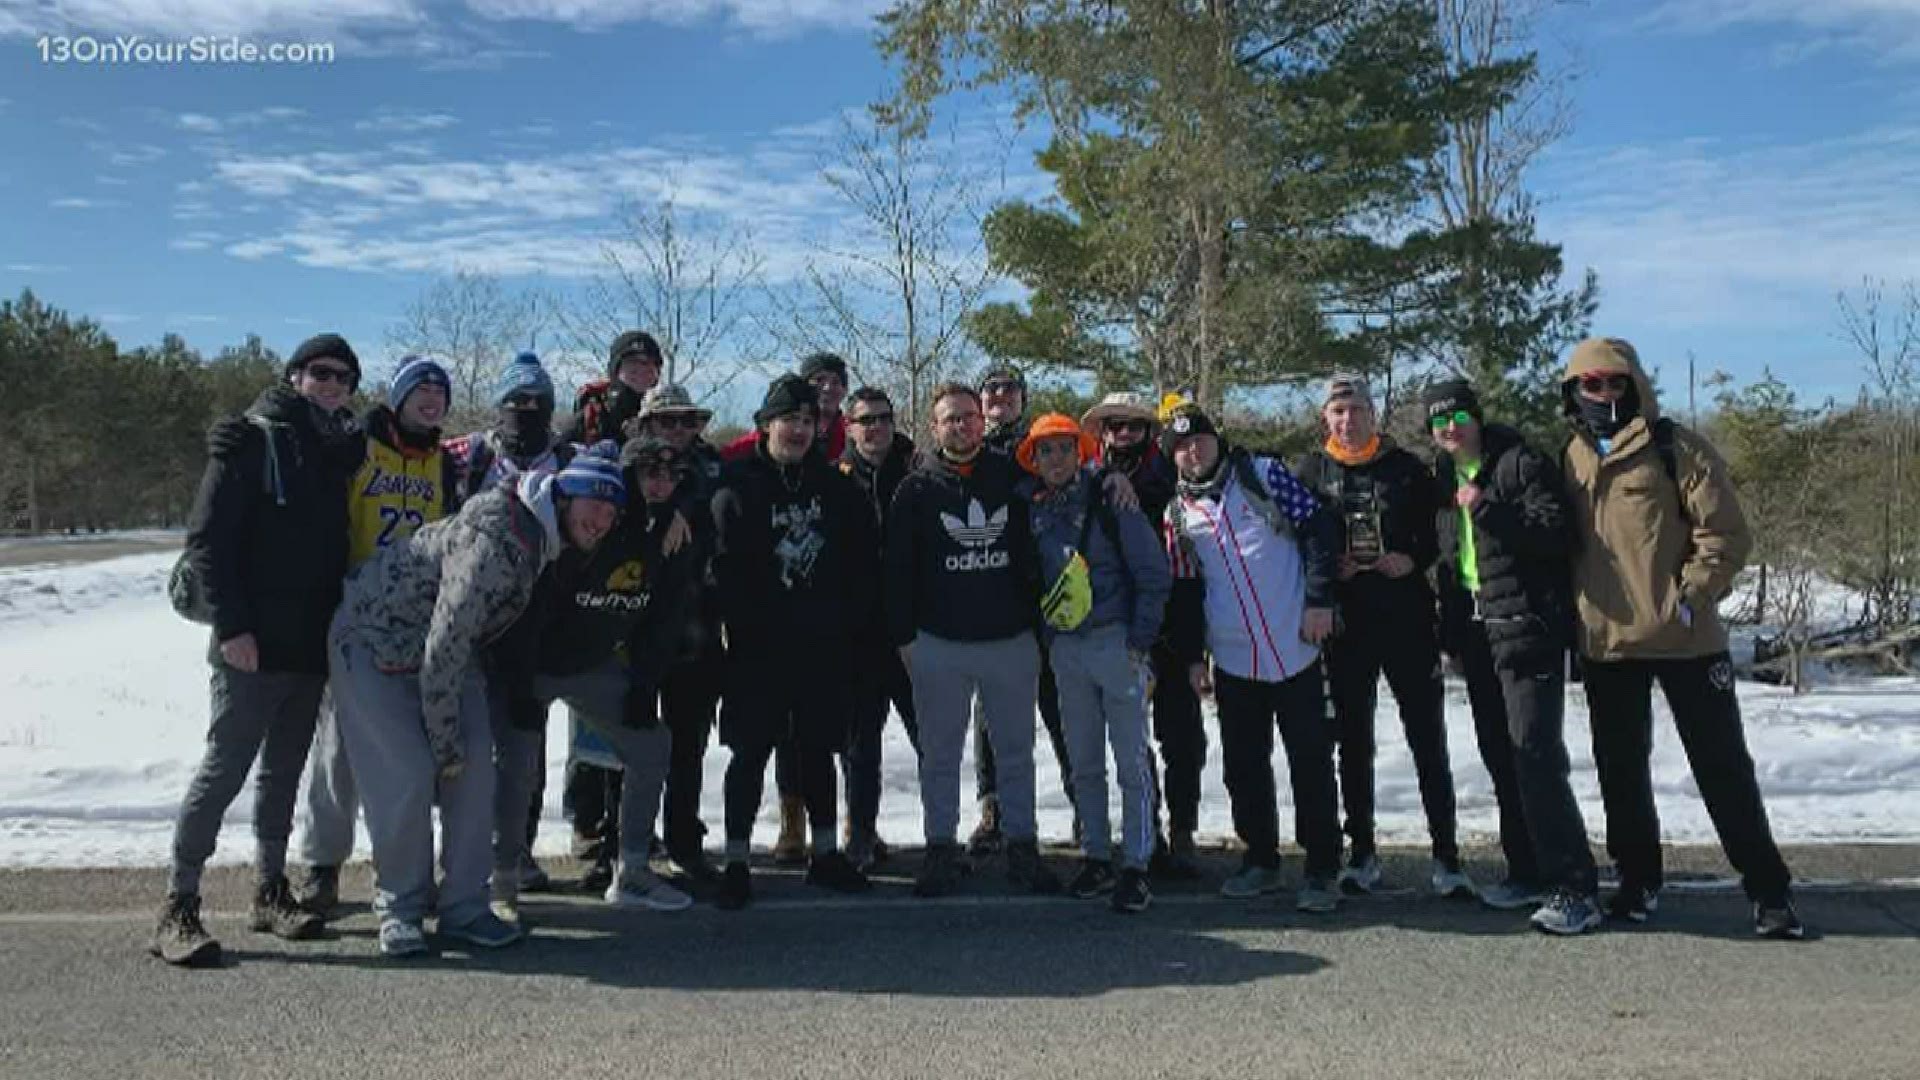 For the eighth time, members of the Alpha Tau Omega Fraternity Lamda Chapter walked 160 miles to raise money for the fight against Multiple Sclerosis.